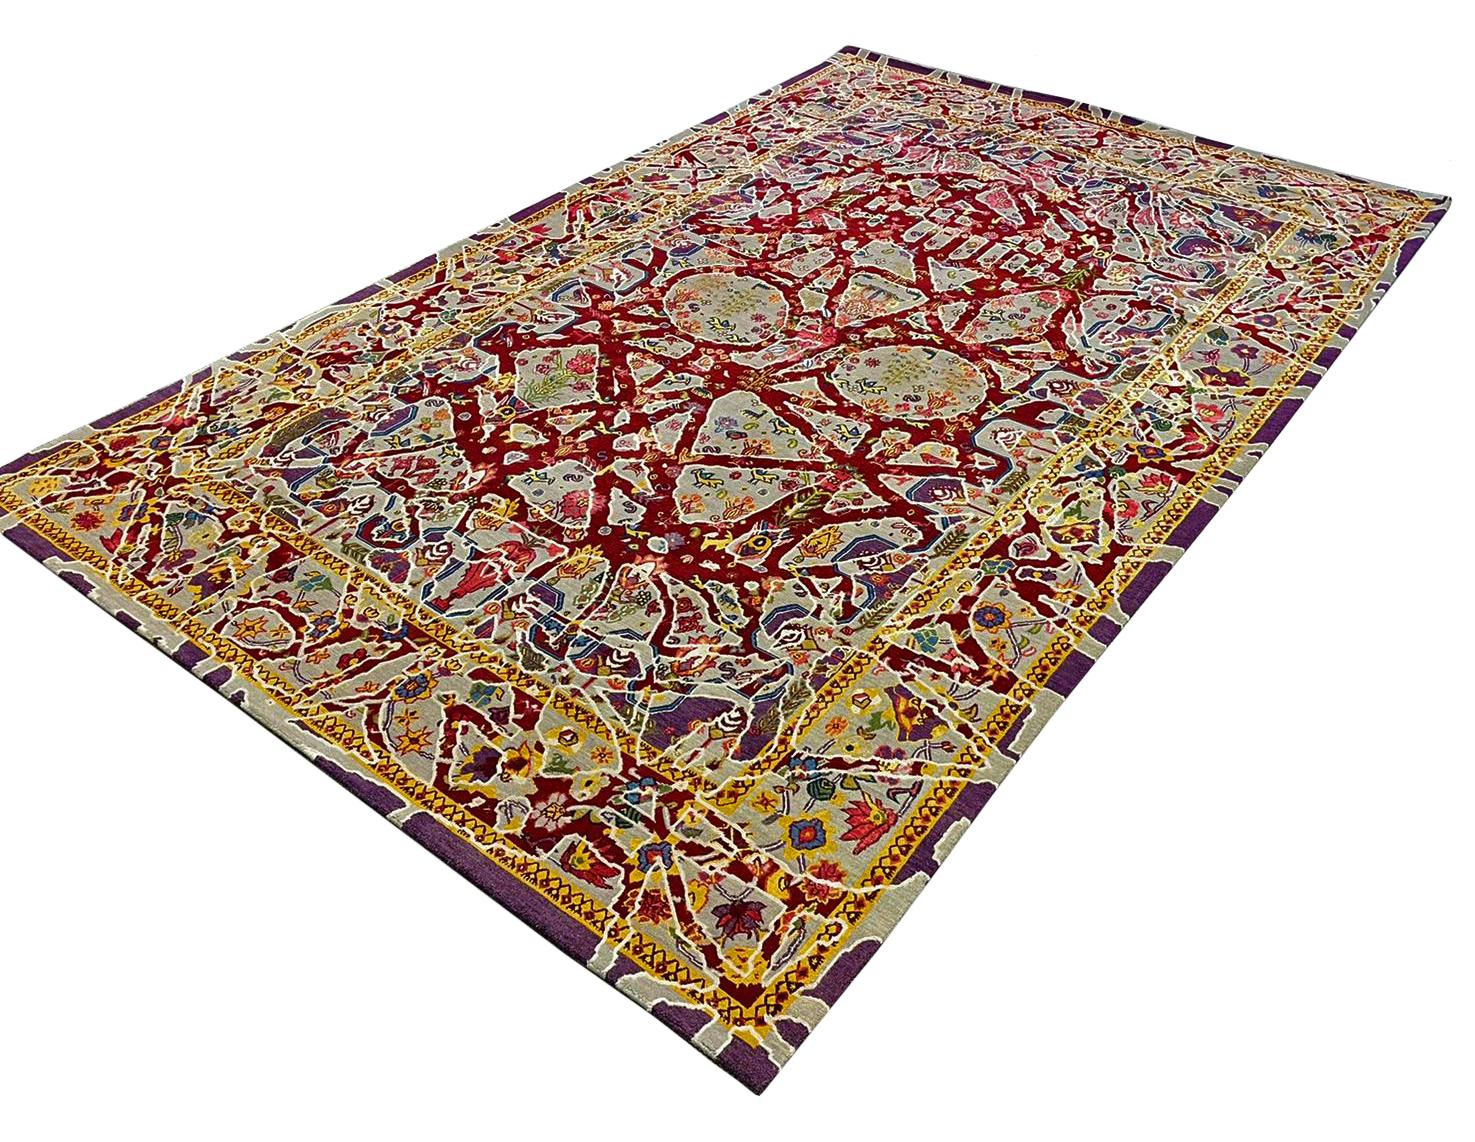 Nepalese Multicolored Handwoven Wool and Silk Modern Persian Skull Rug by Gordian Rugs For Sale